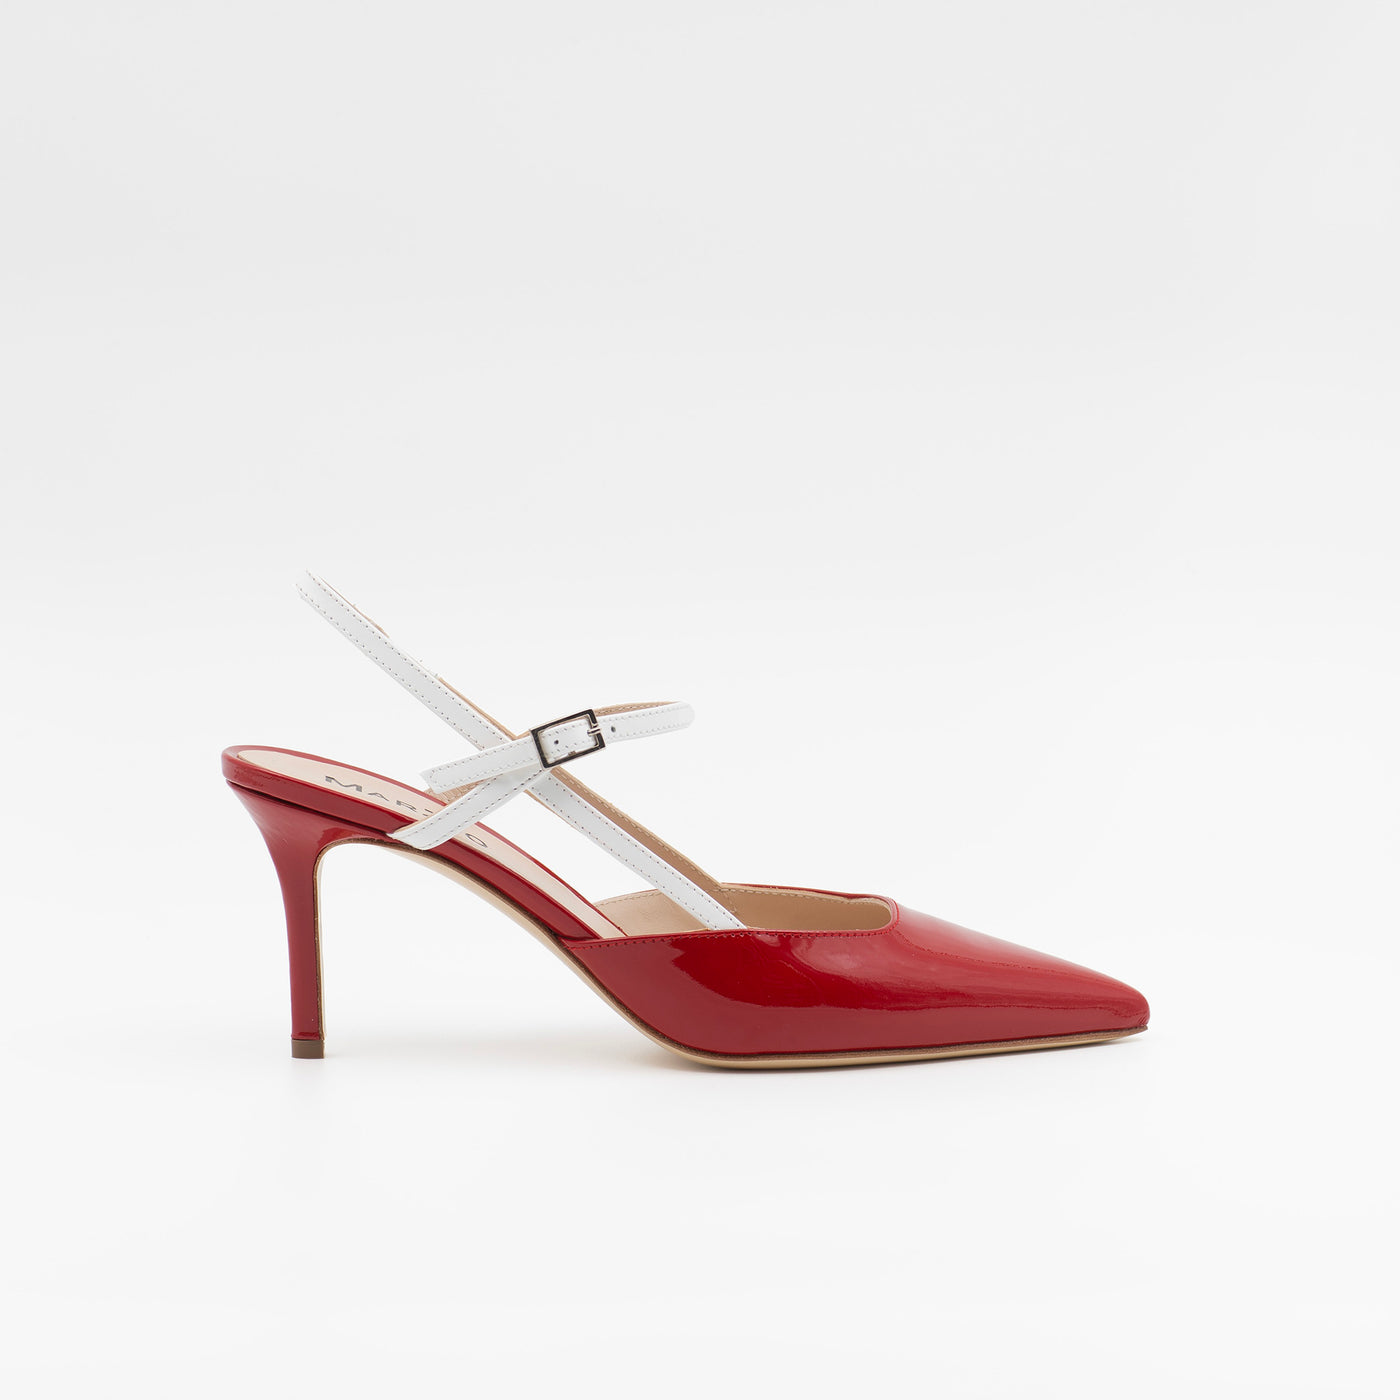 Buckle Strapped Pumps in Red Patent